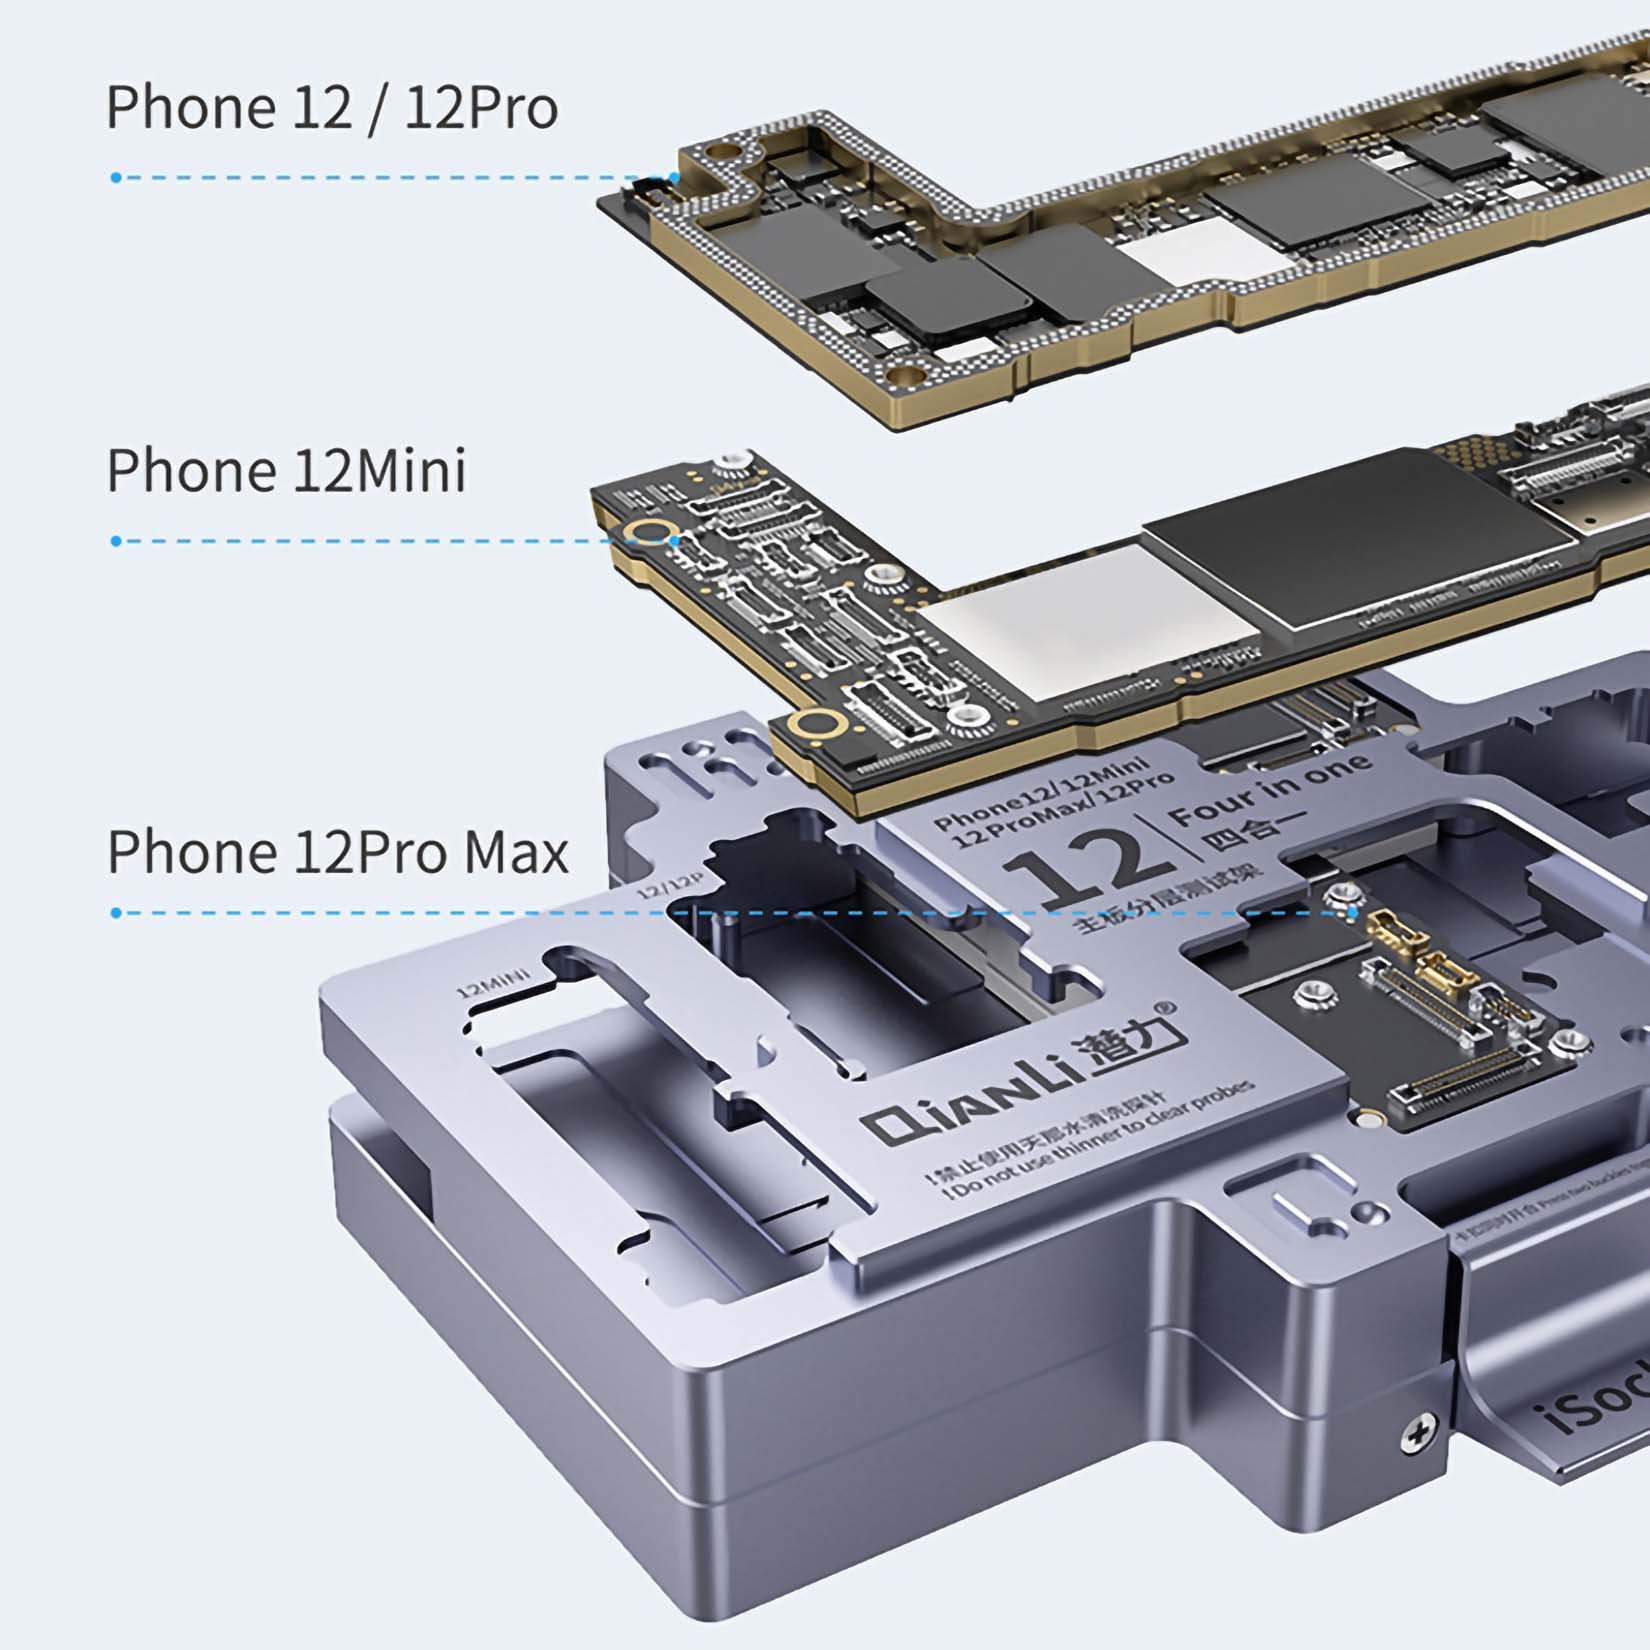 Qianli iSocket Motherboard Layered Test Fixture For iPhone 12 Series